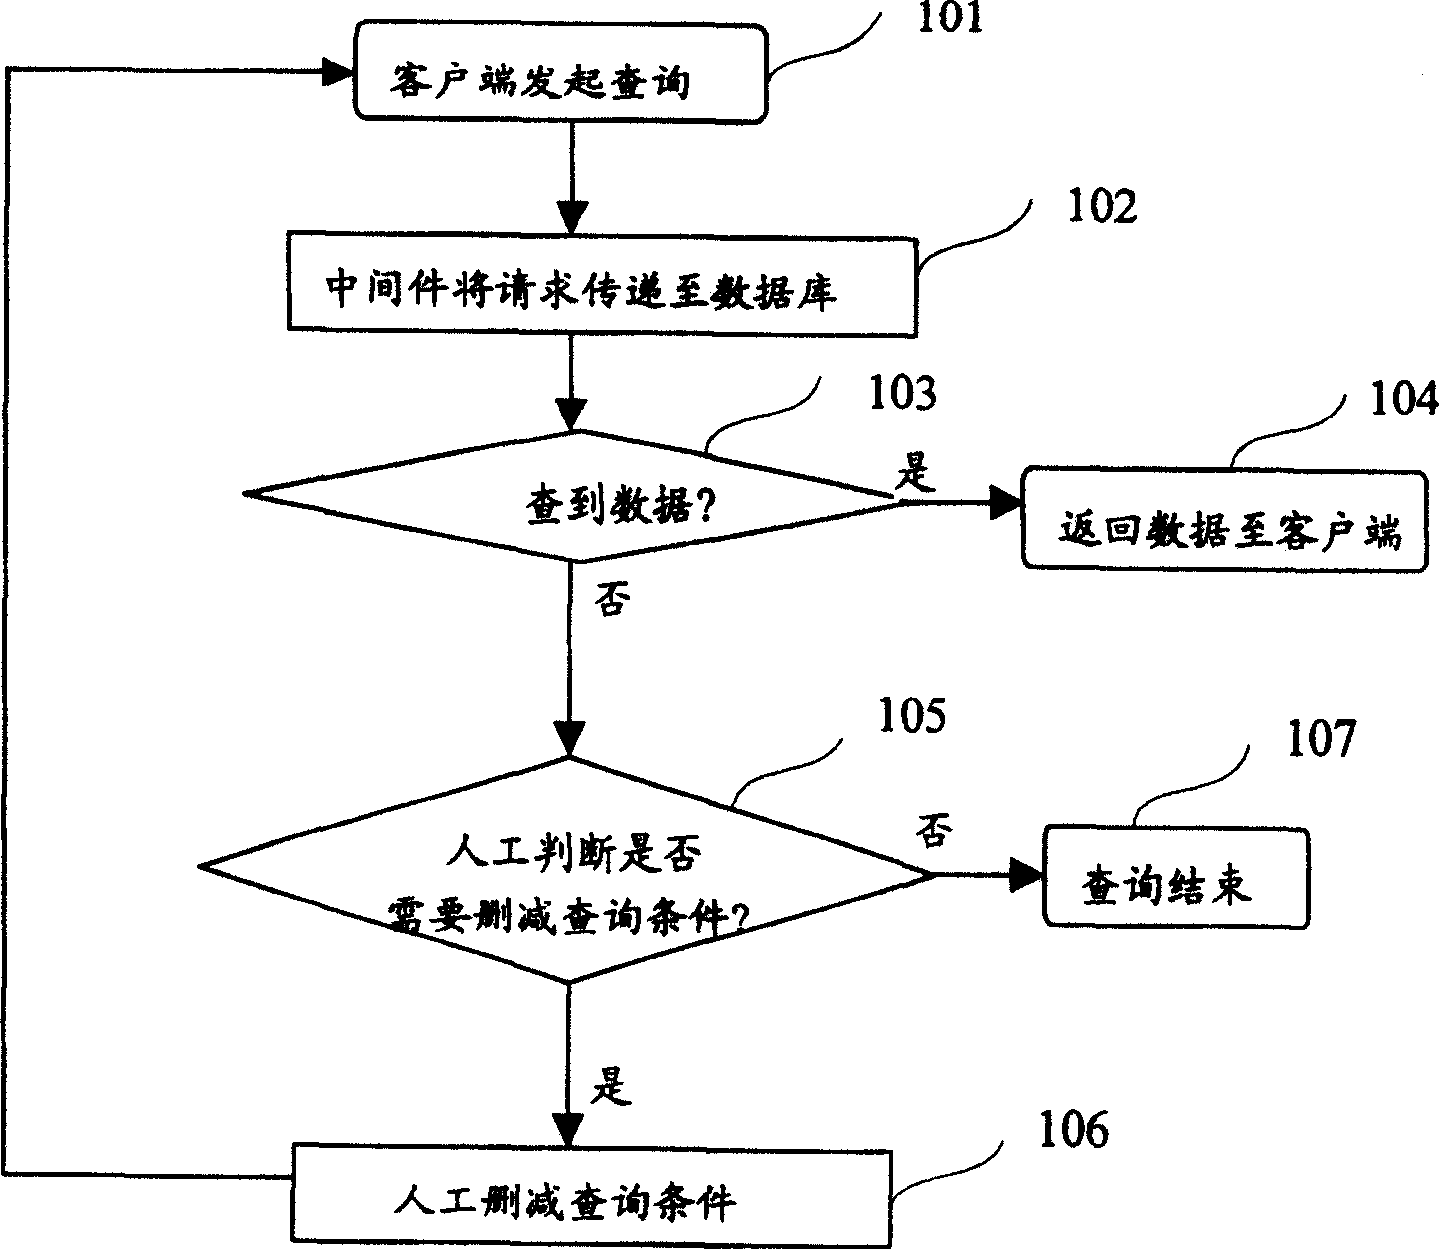 Information searching method and device in relation ship data bank